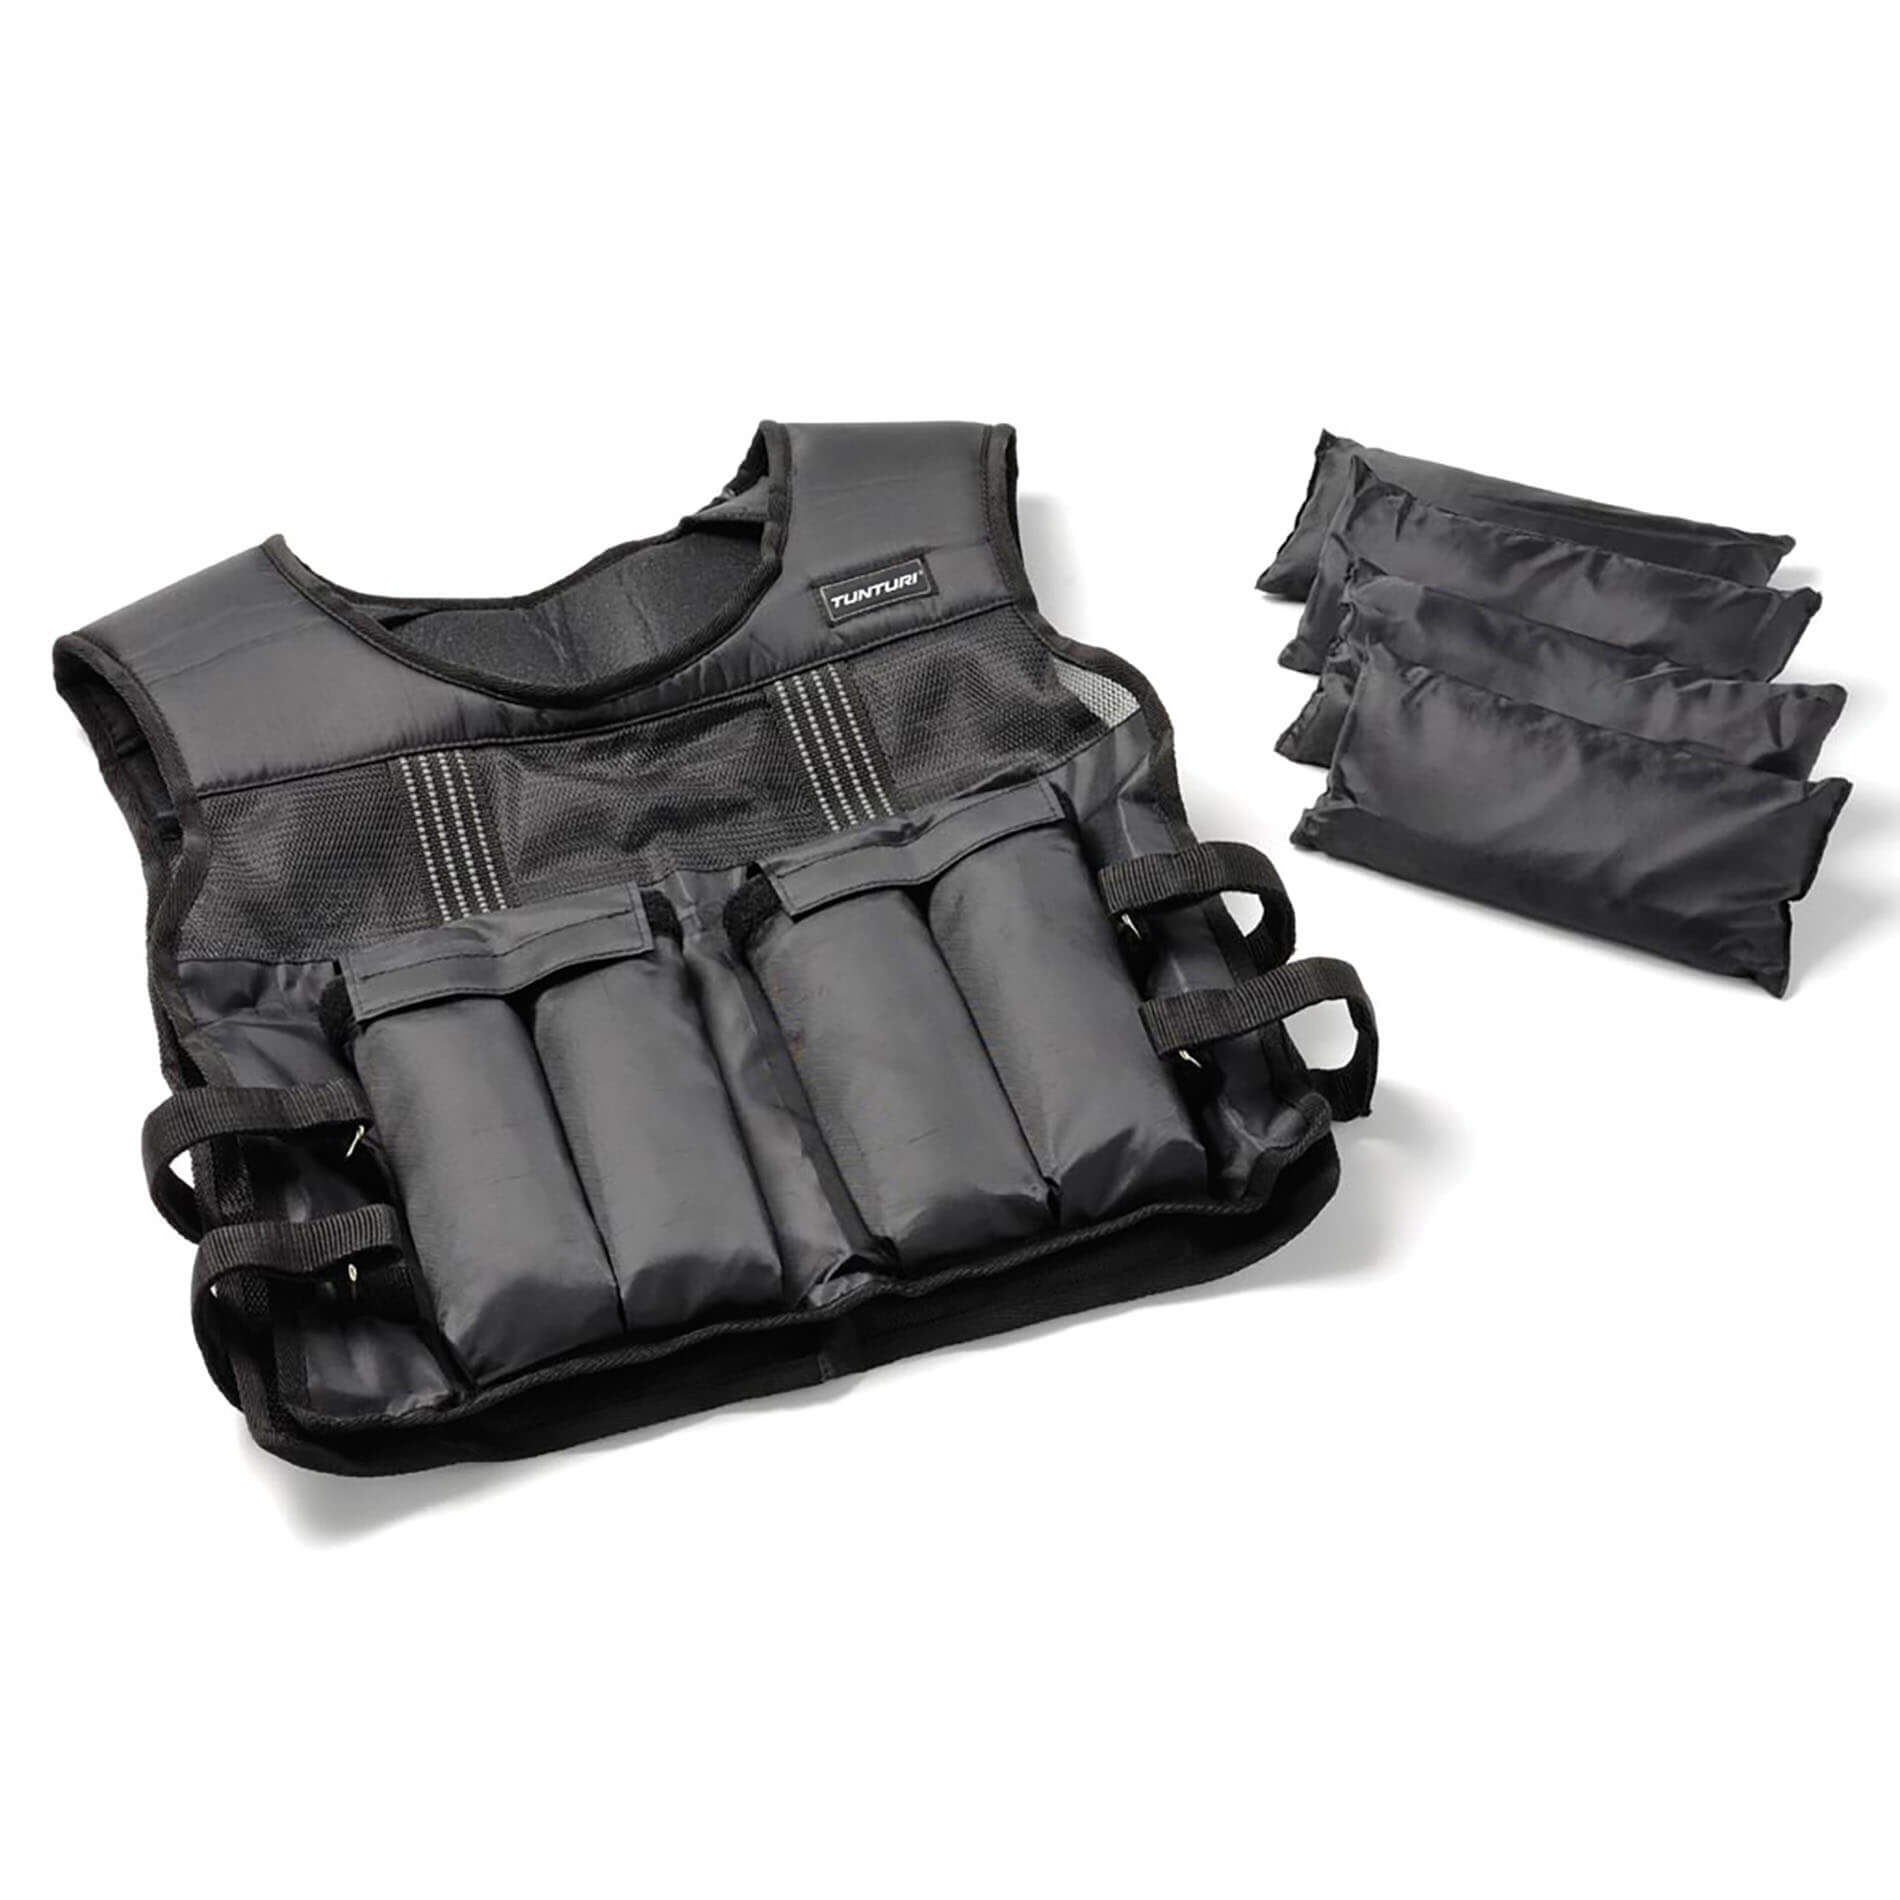 Weighted Vest Coupons